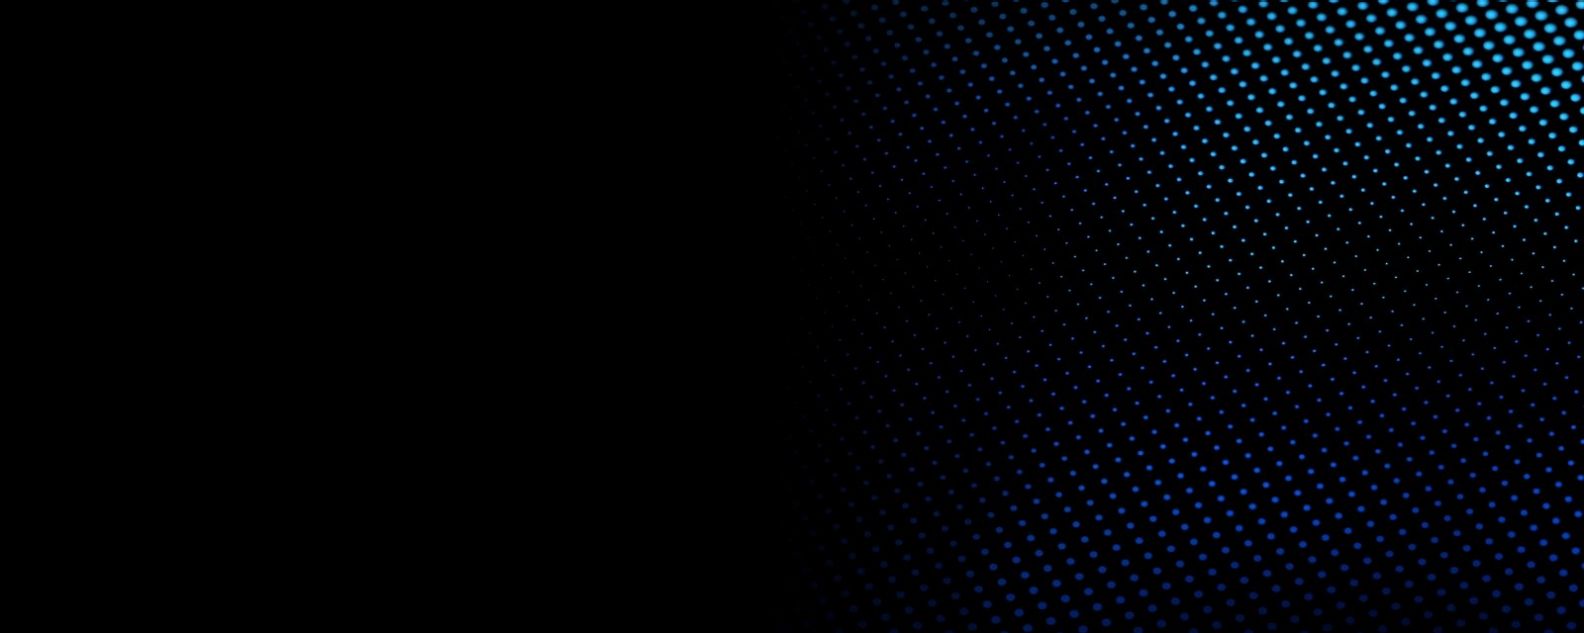 Black background with polkadot texture